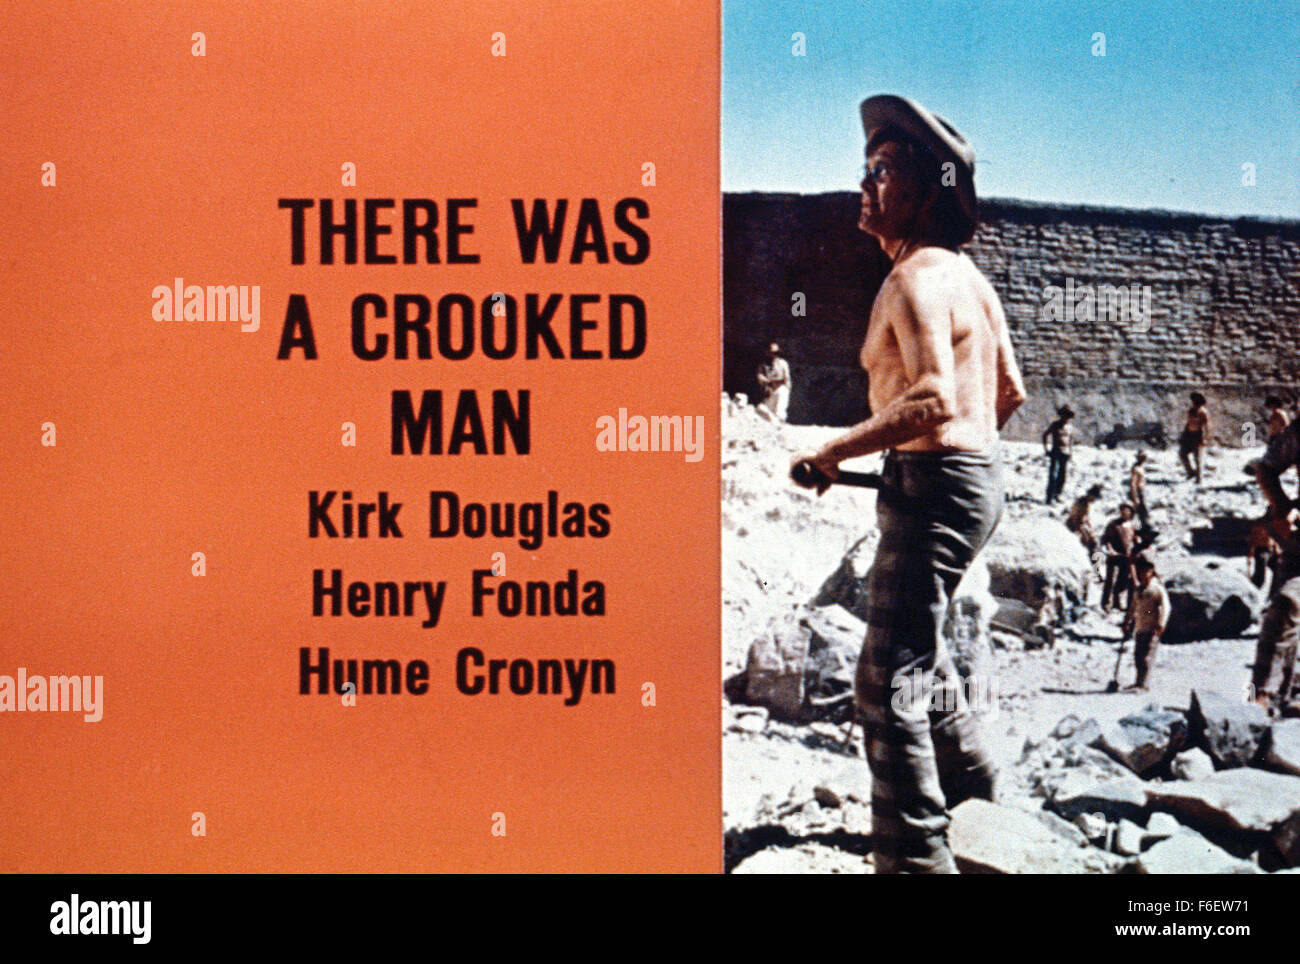 RELEASE DATE: December 25, 1970. MOVIE TITLE: There Was a Crooked Man. STUDIO: Warner Bros. Pictures. PLOT: Charm, intelligence and success in criminal career doesn't prevent Paris Pitman Jr. to start doing ten years in prison, in the middle of the Arizona desert. However, those years should pass quickly because of a $500,000 loot previously stashed away. New idealistic warden would only make Pitman think of getting his fortune even sooner. He starts to manipulate everyone to achieve his goal. PICTURED: KIRK DOUGLAS as Paris Pitman, Jr., HENRY FONDA as Woodward W. Lopeman and HUME CRONYN as Du Stock Photo